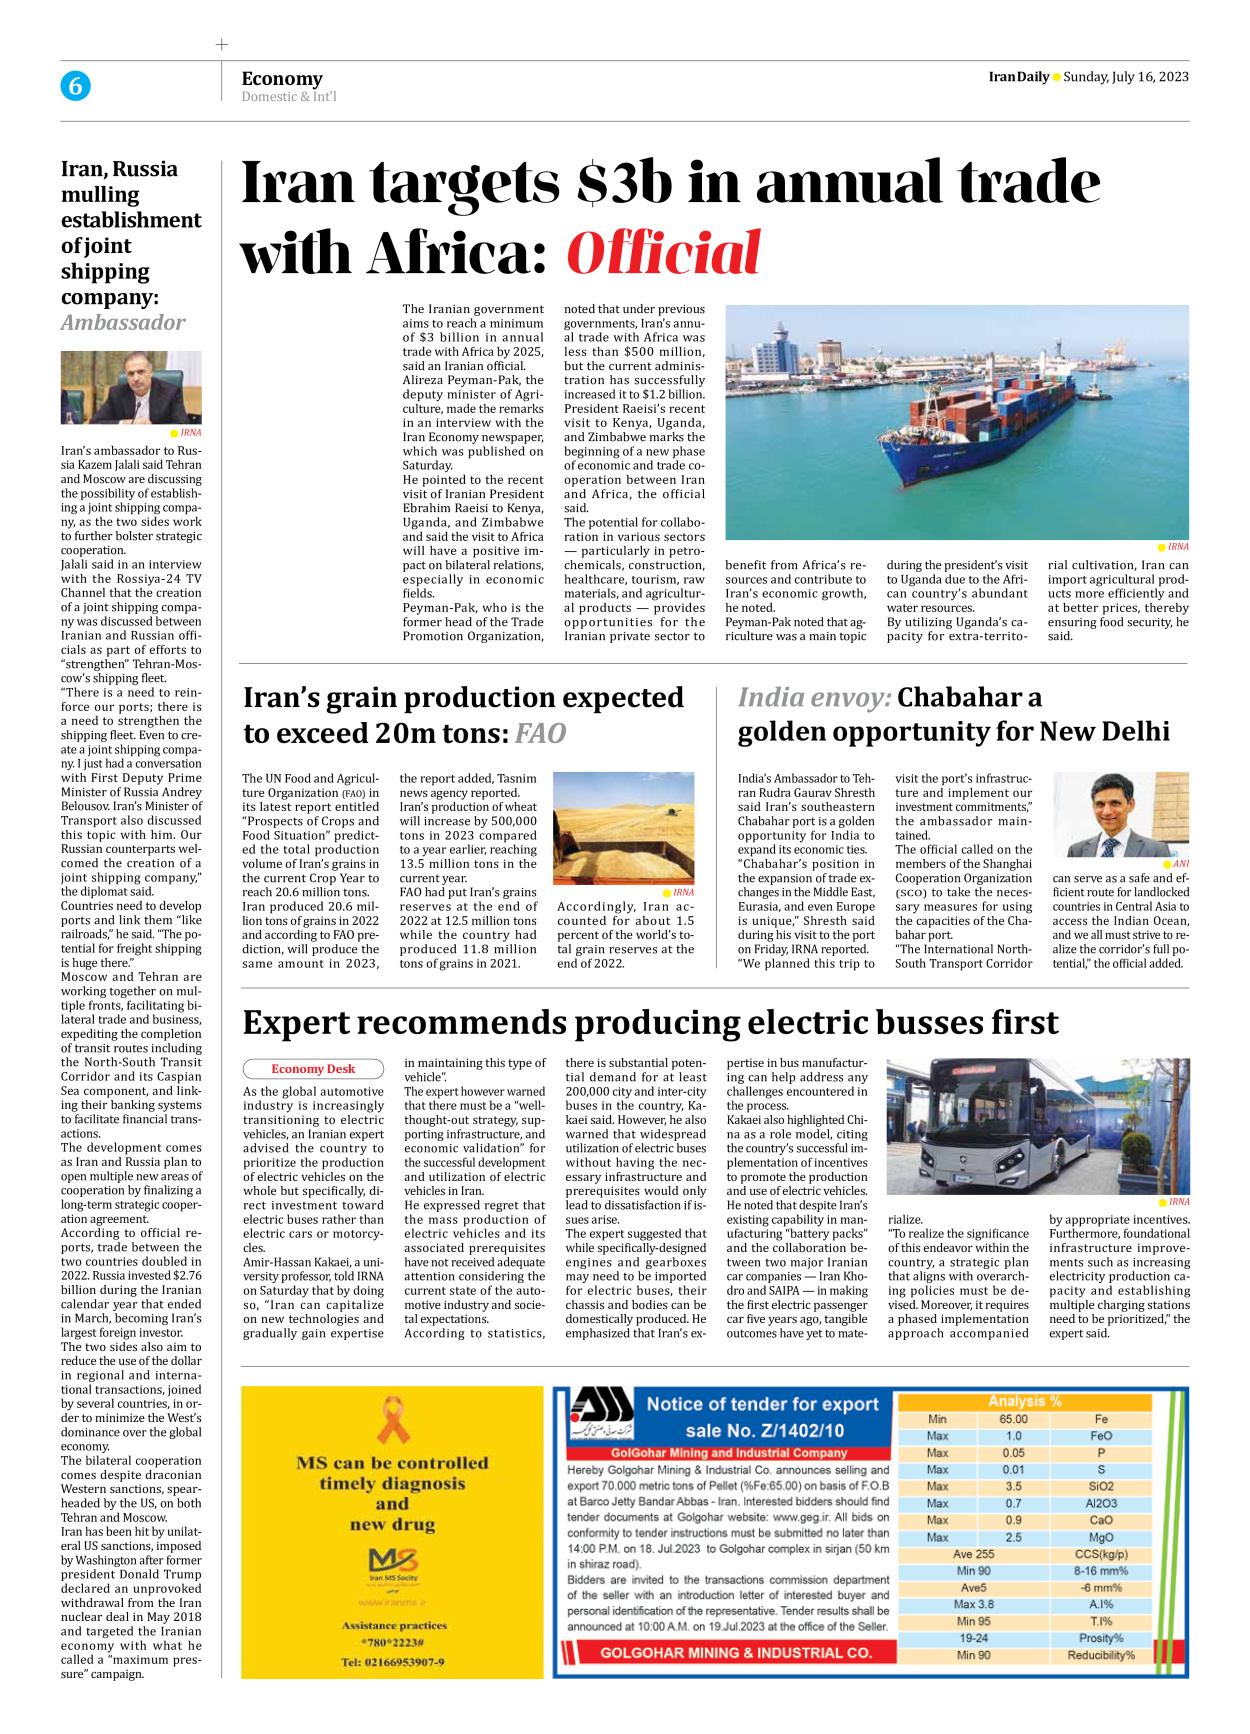 Iran Daily - Number Seven Thousand Three Hundred and Forty - 16 July 2023 - Page 6